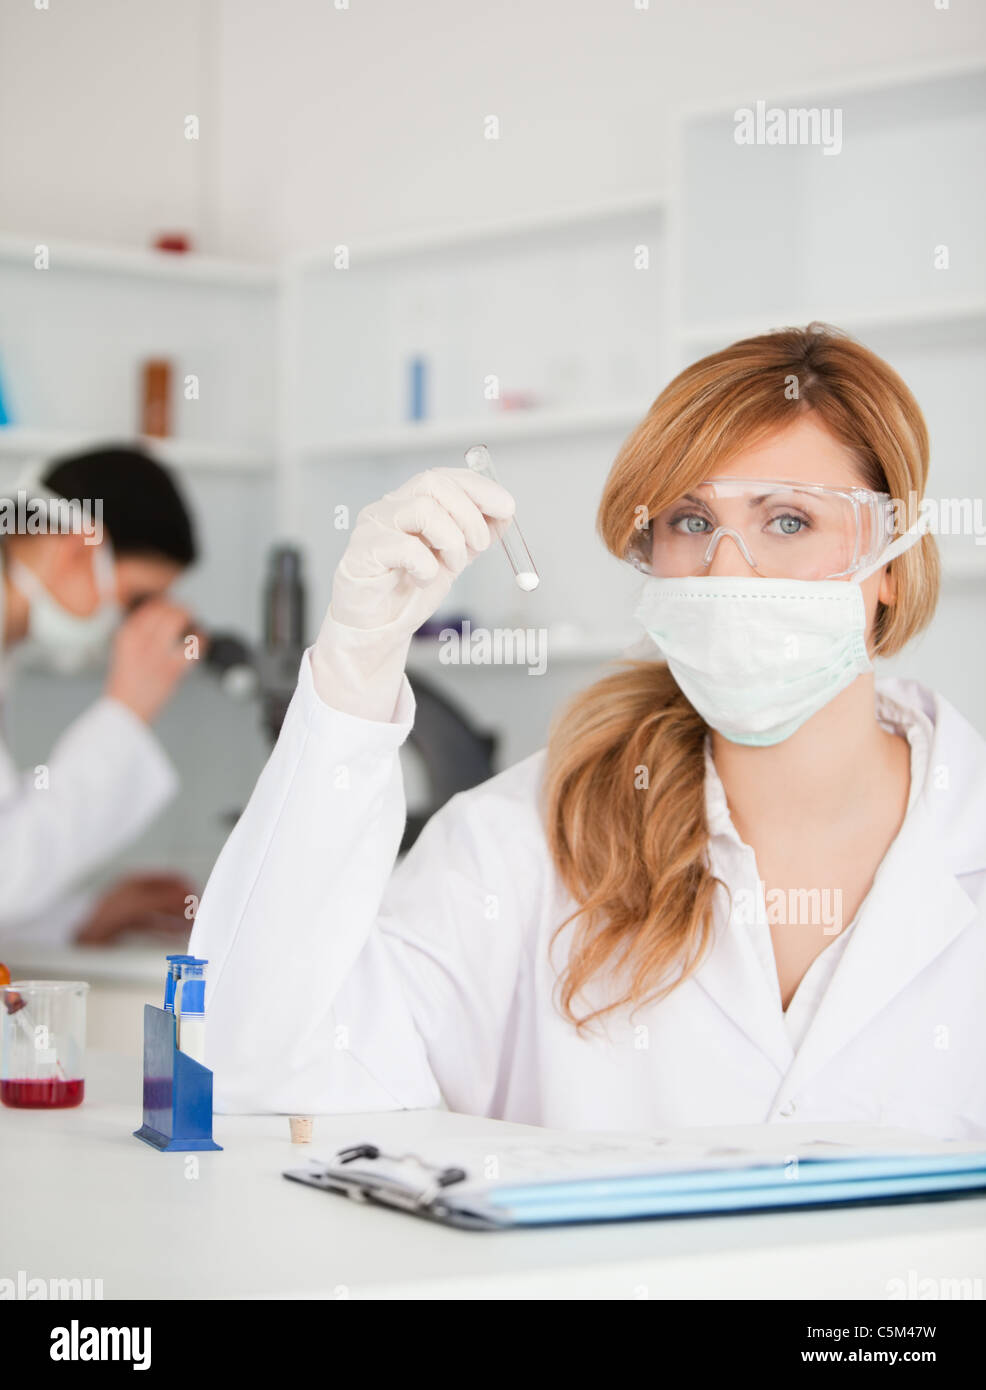 Scientists conducting an experiment Stock Photo